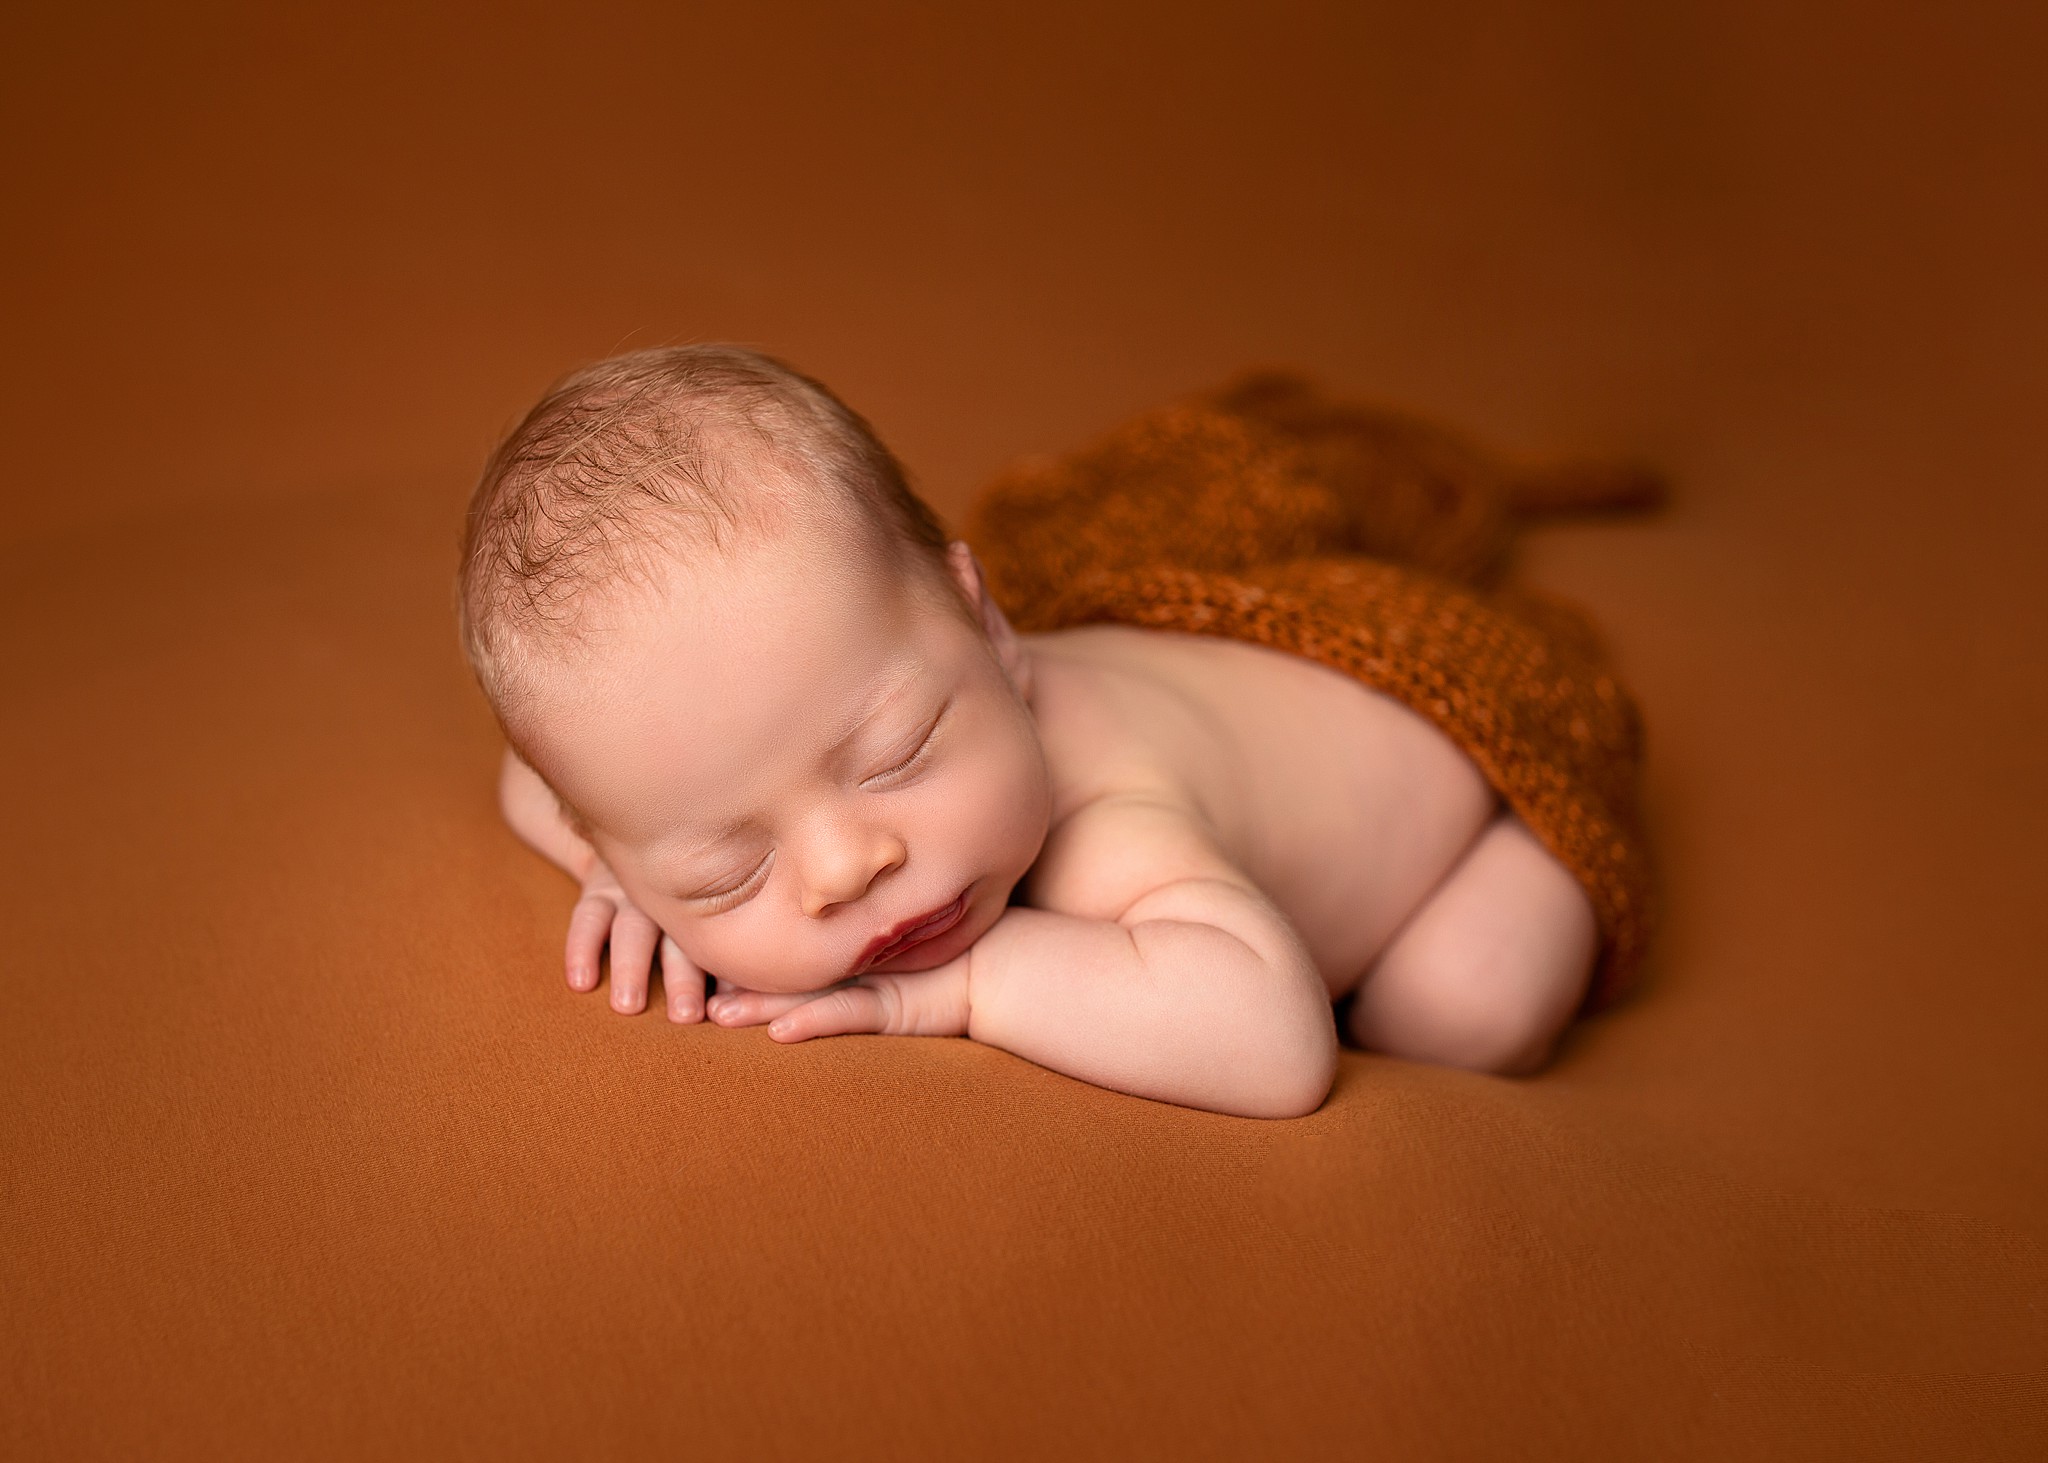 A Kamloops newborn photographer poses a sleeping baby boy with his head on his hands on a burnt orange fabric